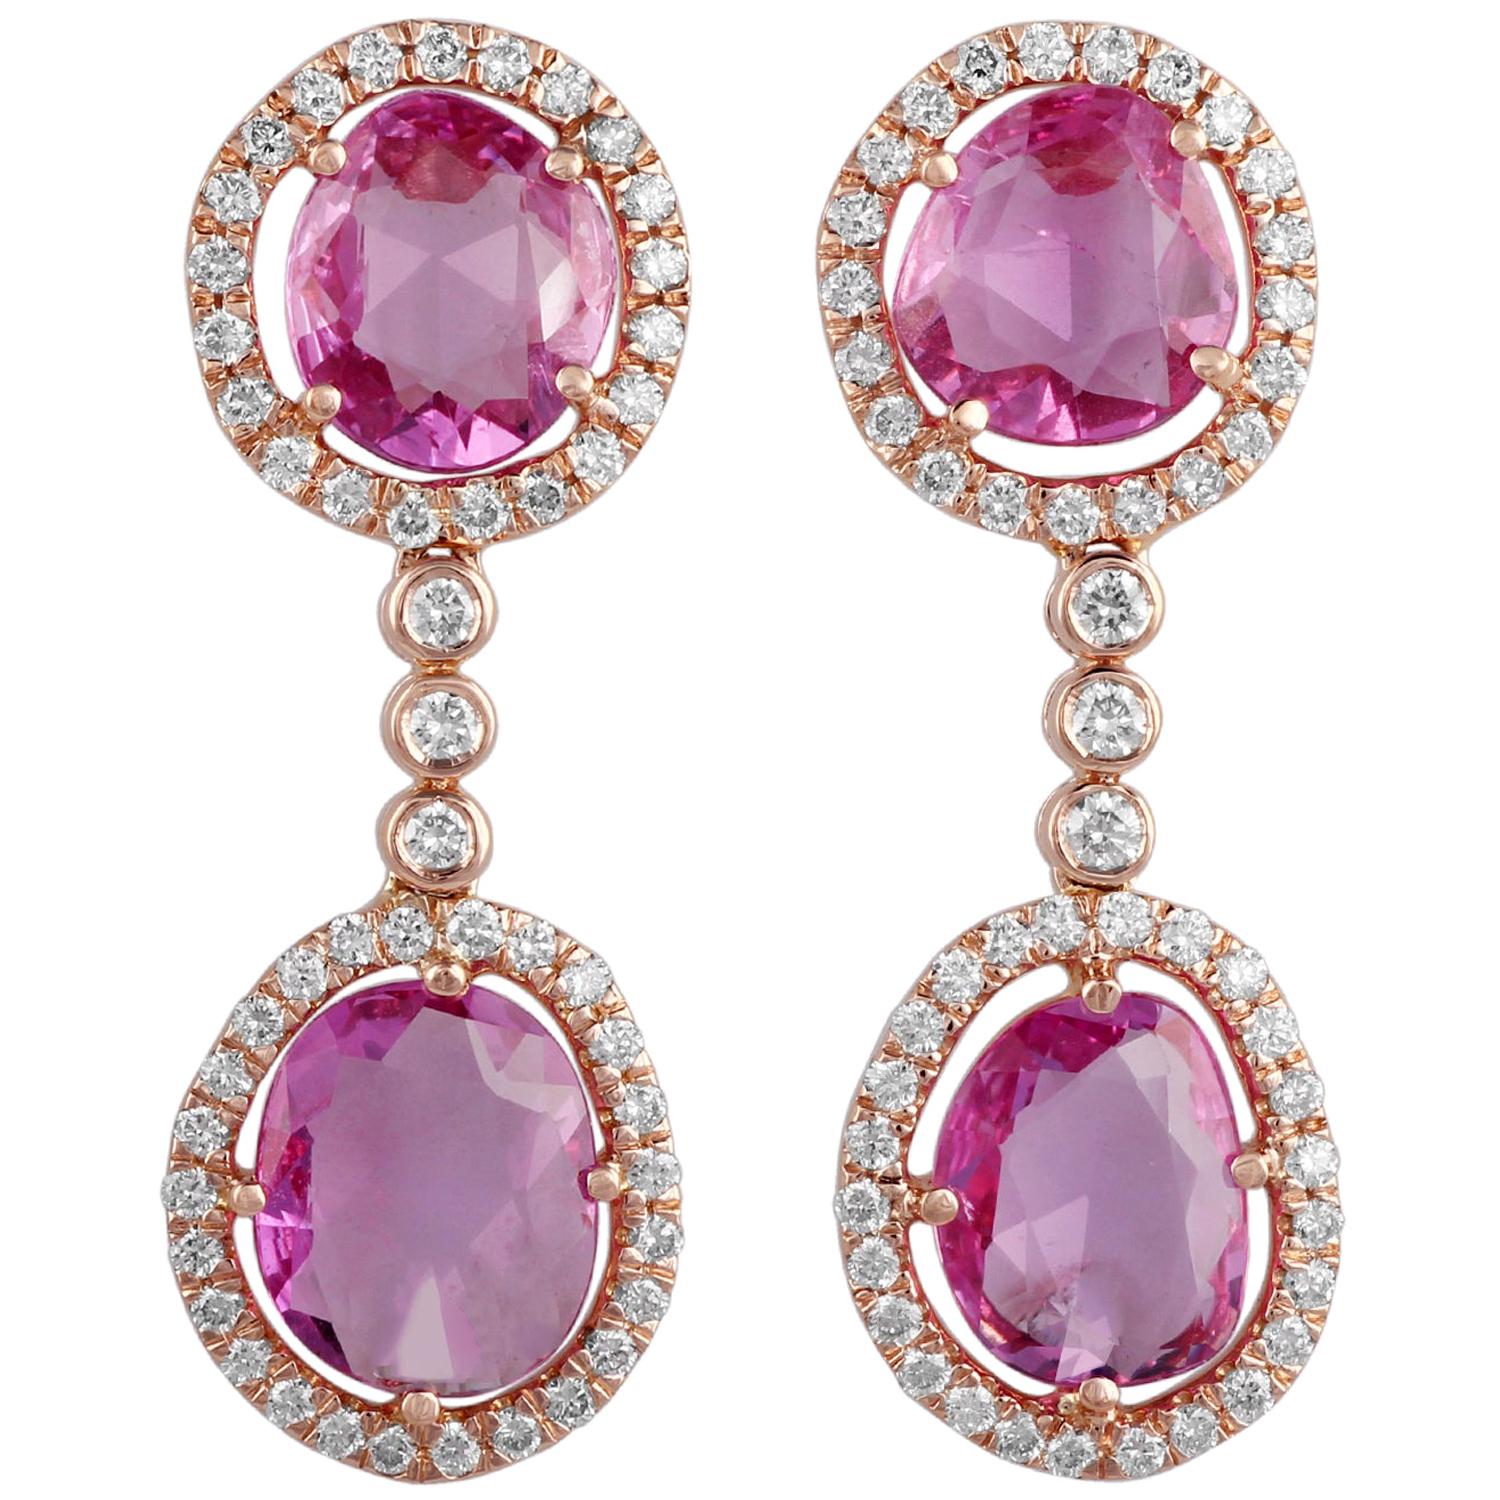 Rose Cut Pink Sapphire and Diamond Earring Studded in 18 Karat Rose Gold